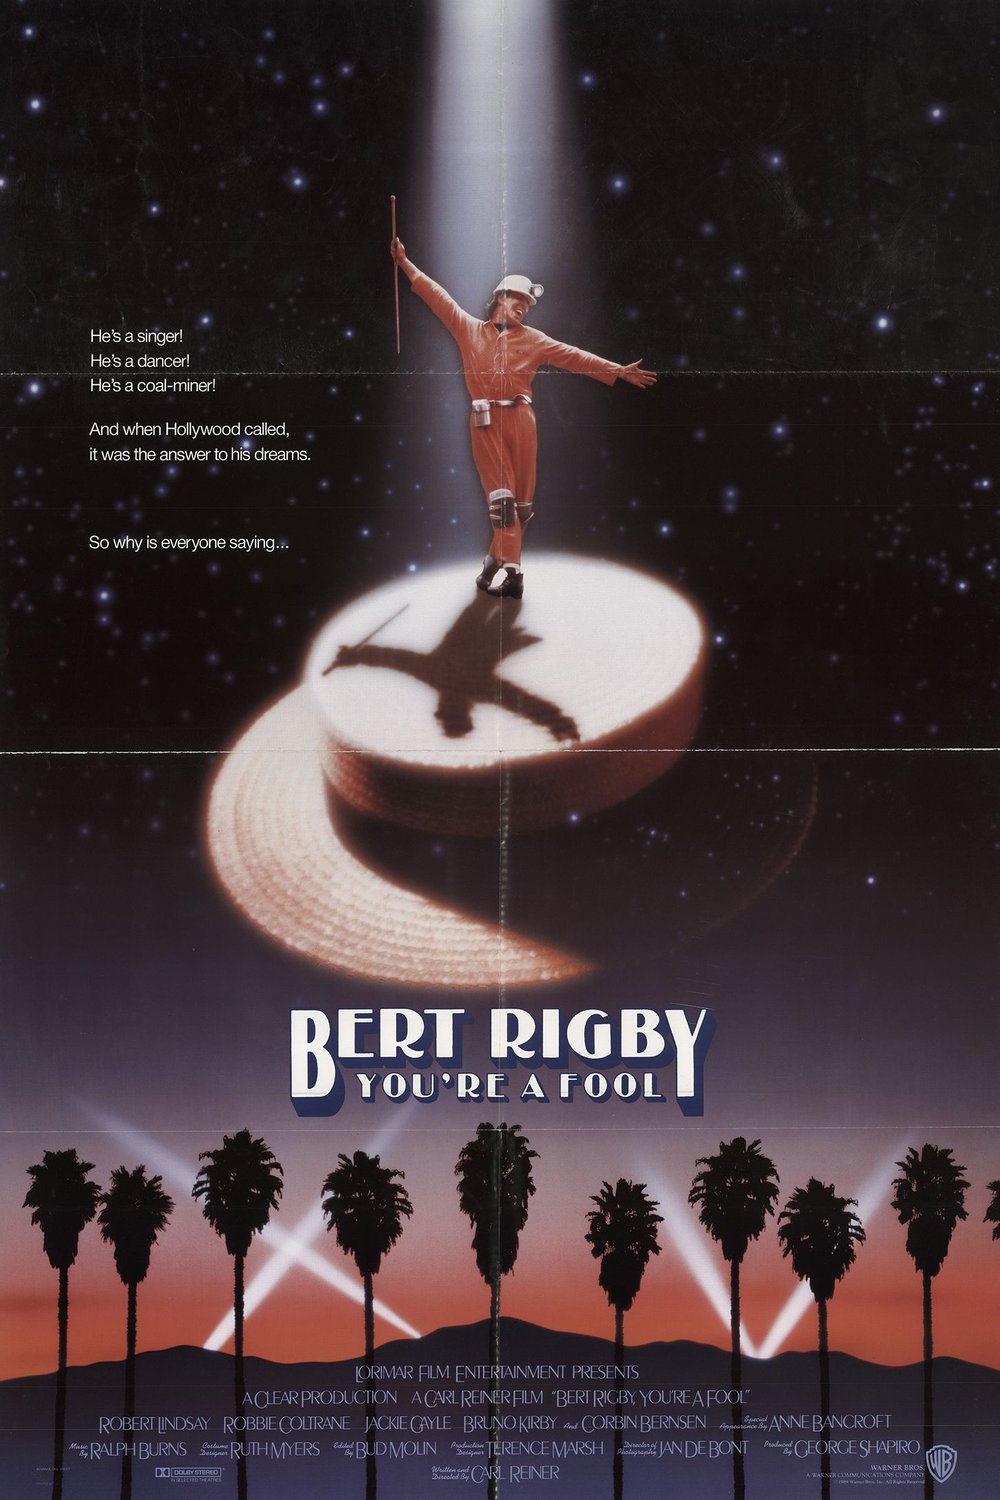 Poster of the movie Bert Rigby, You're a Fool